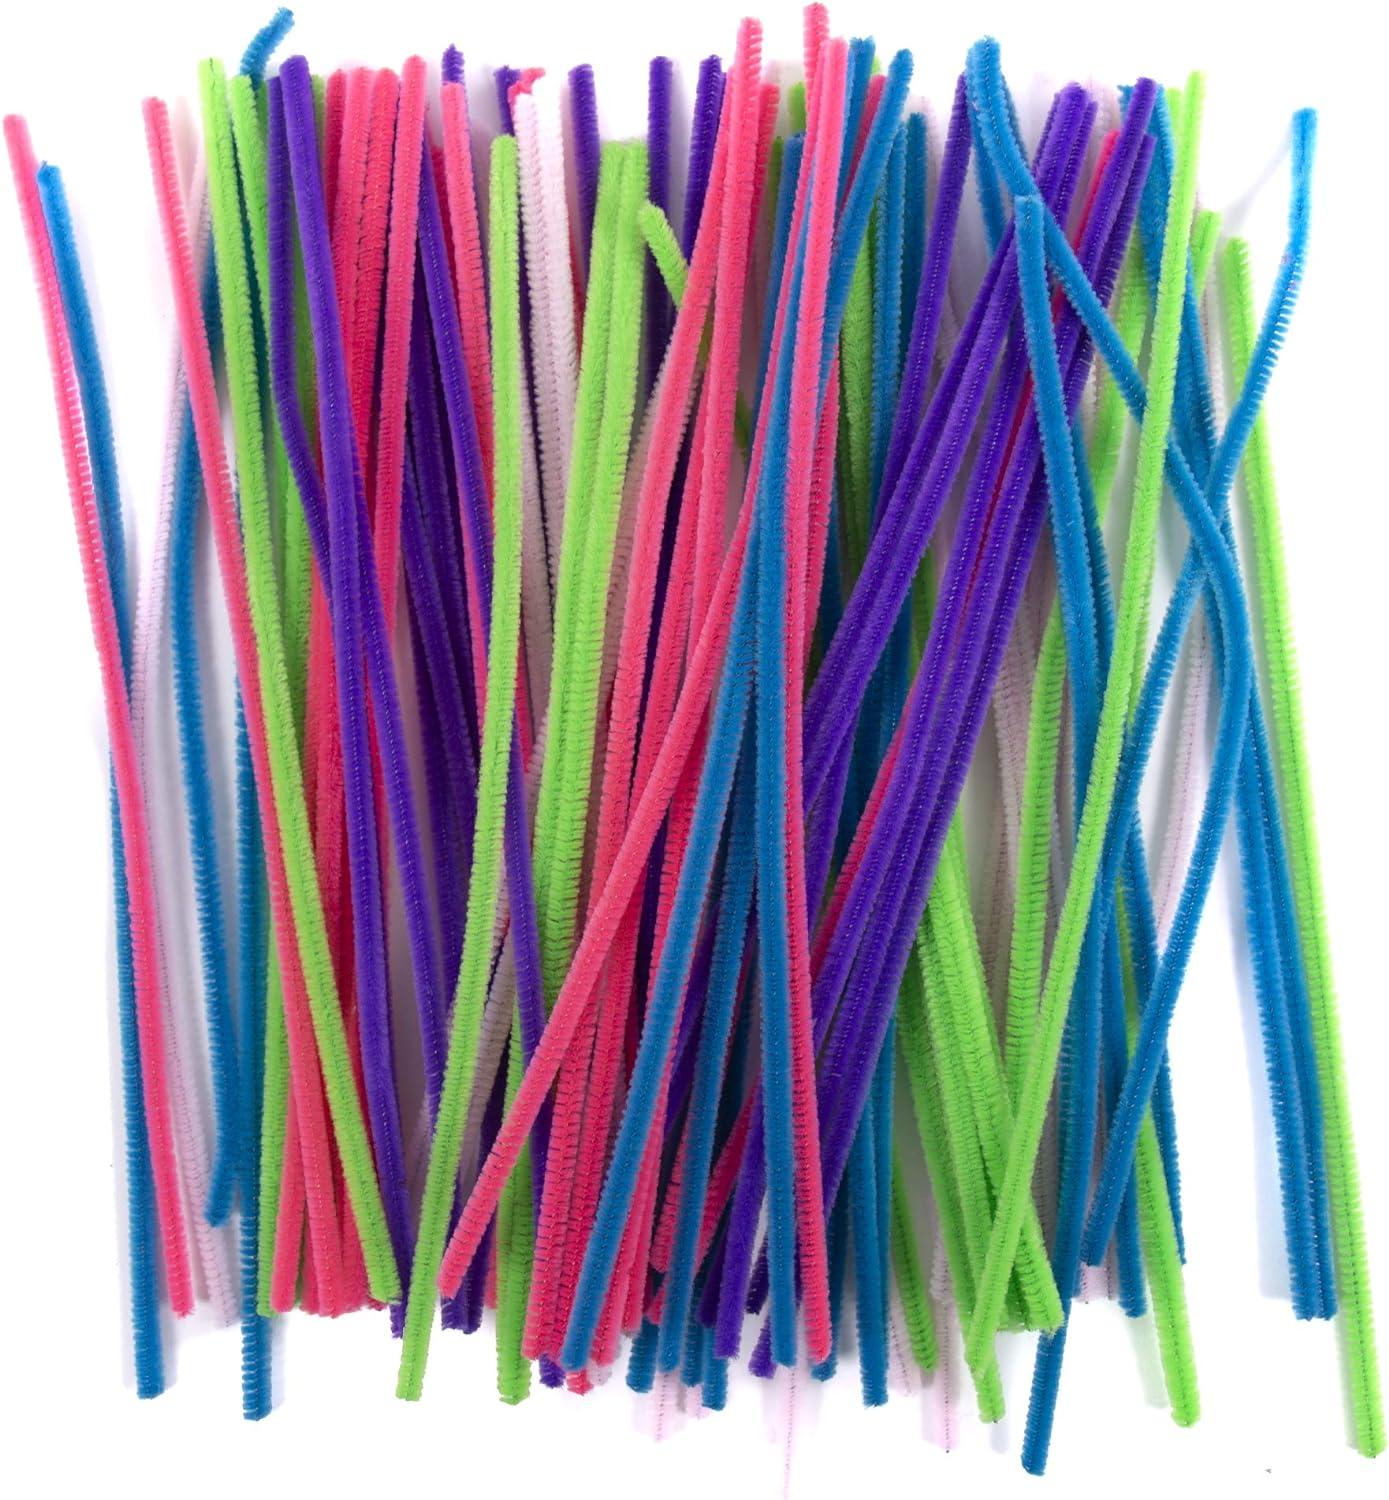 Horizon Group USA 200 Neon Fuzzy Sticks, Value Pack of Pipe